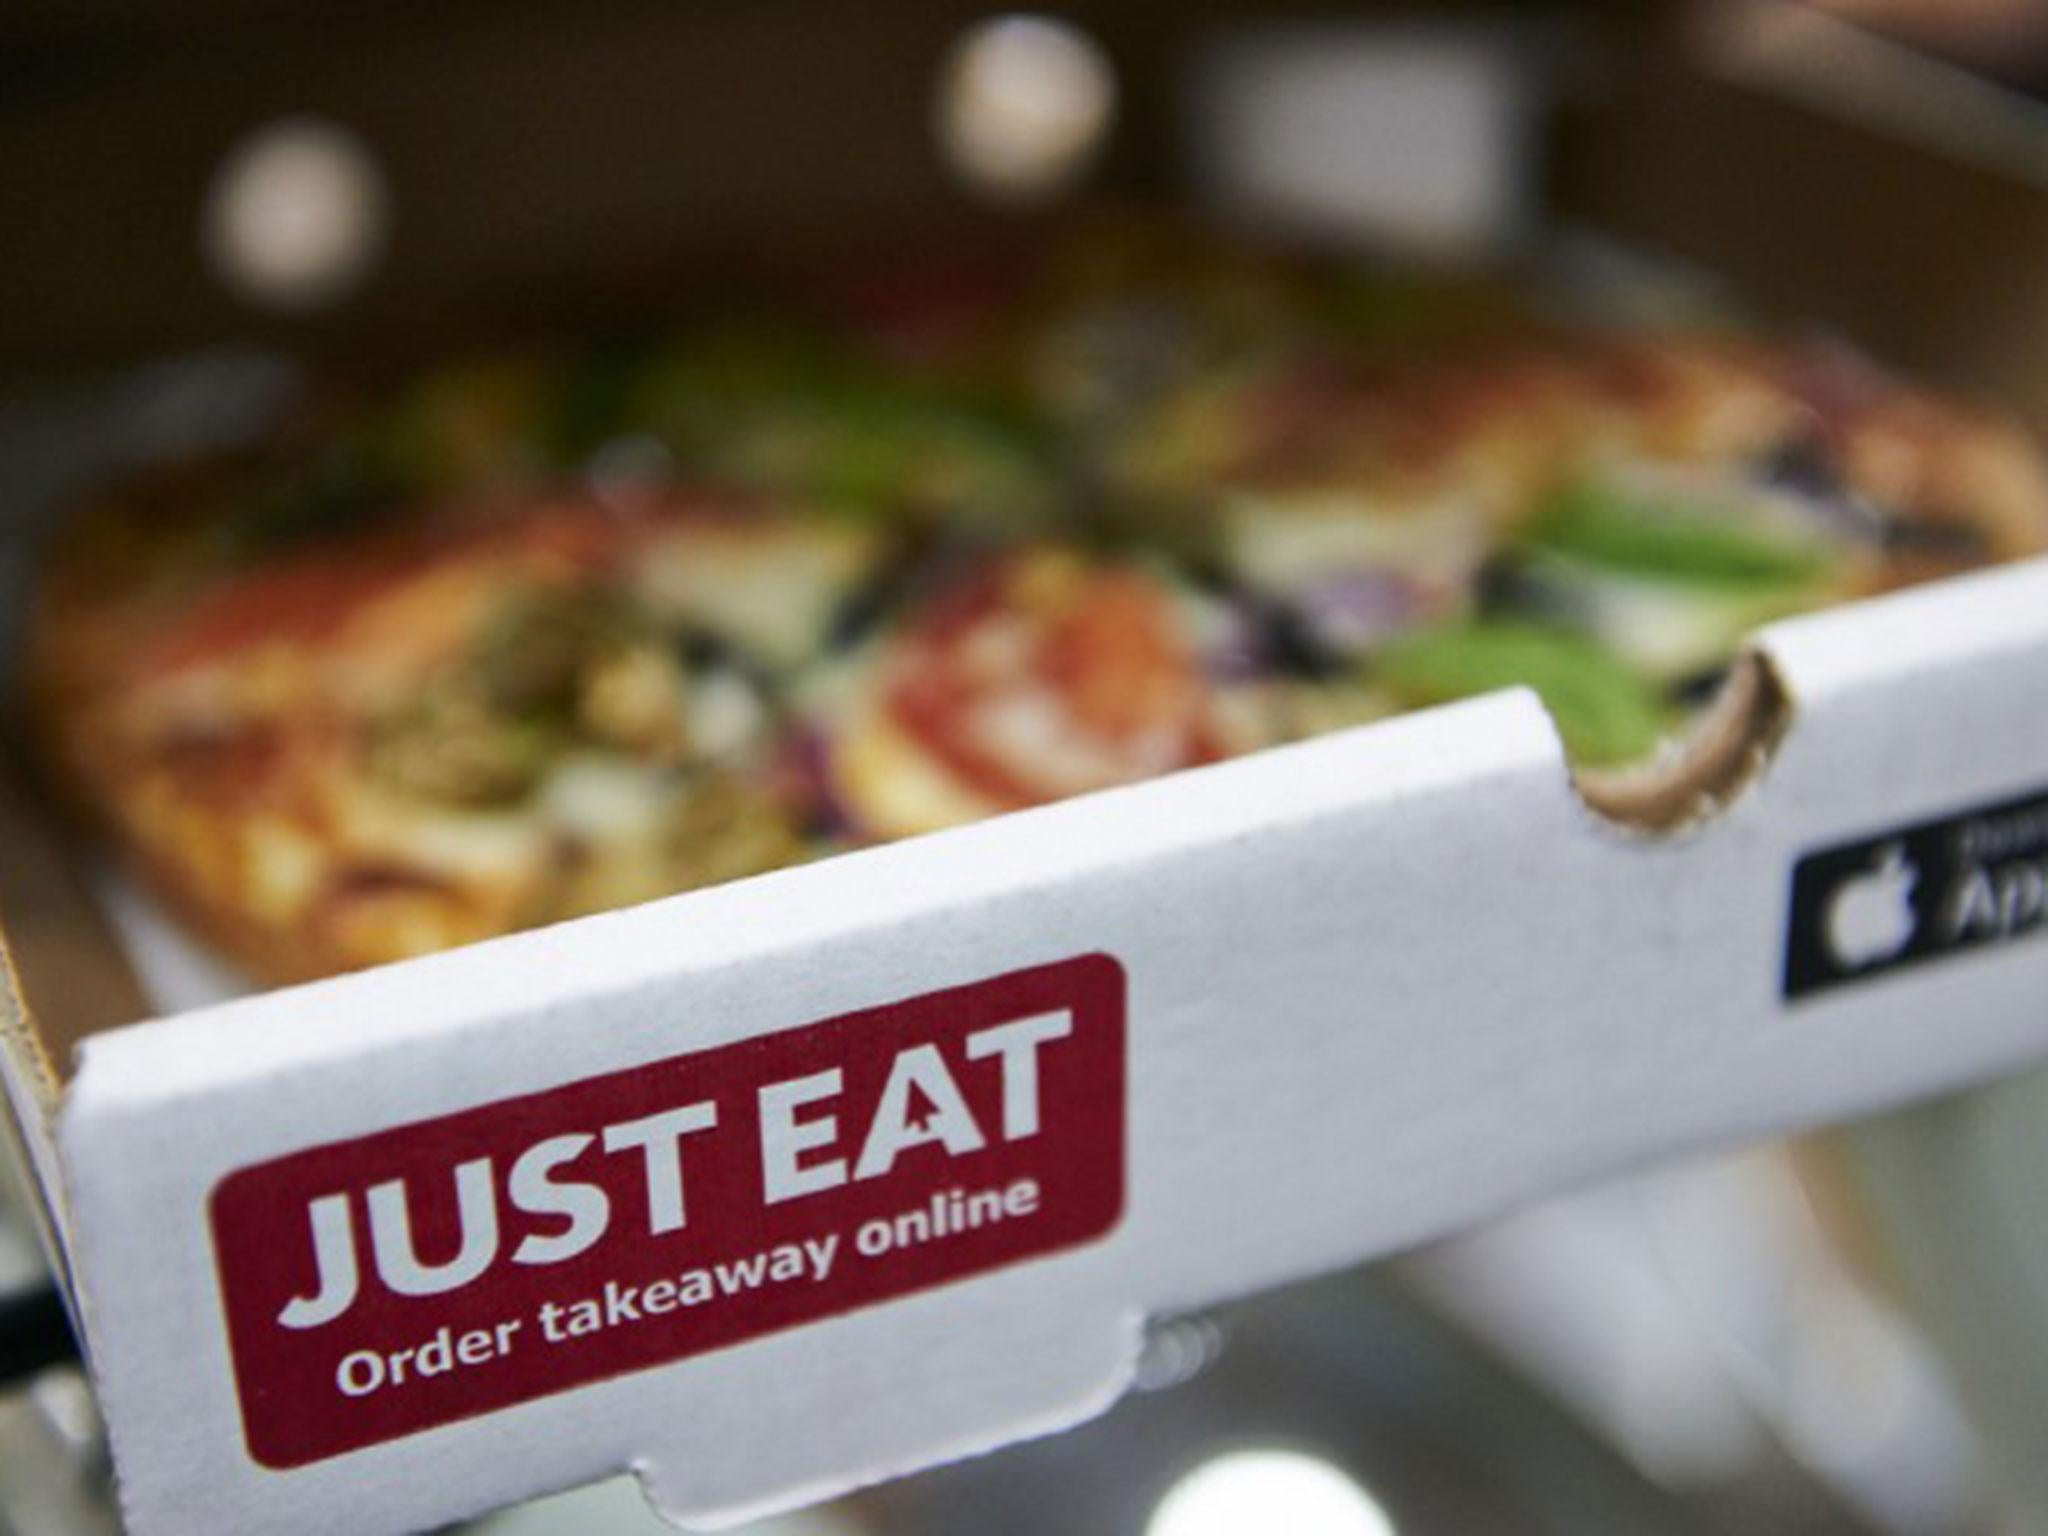 Just Eat has pricing power over the businesses it serves